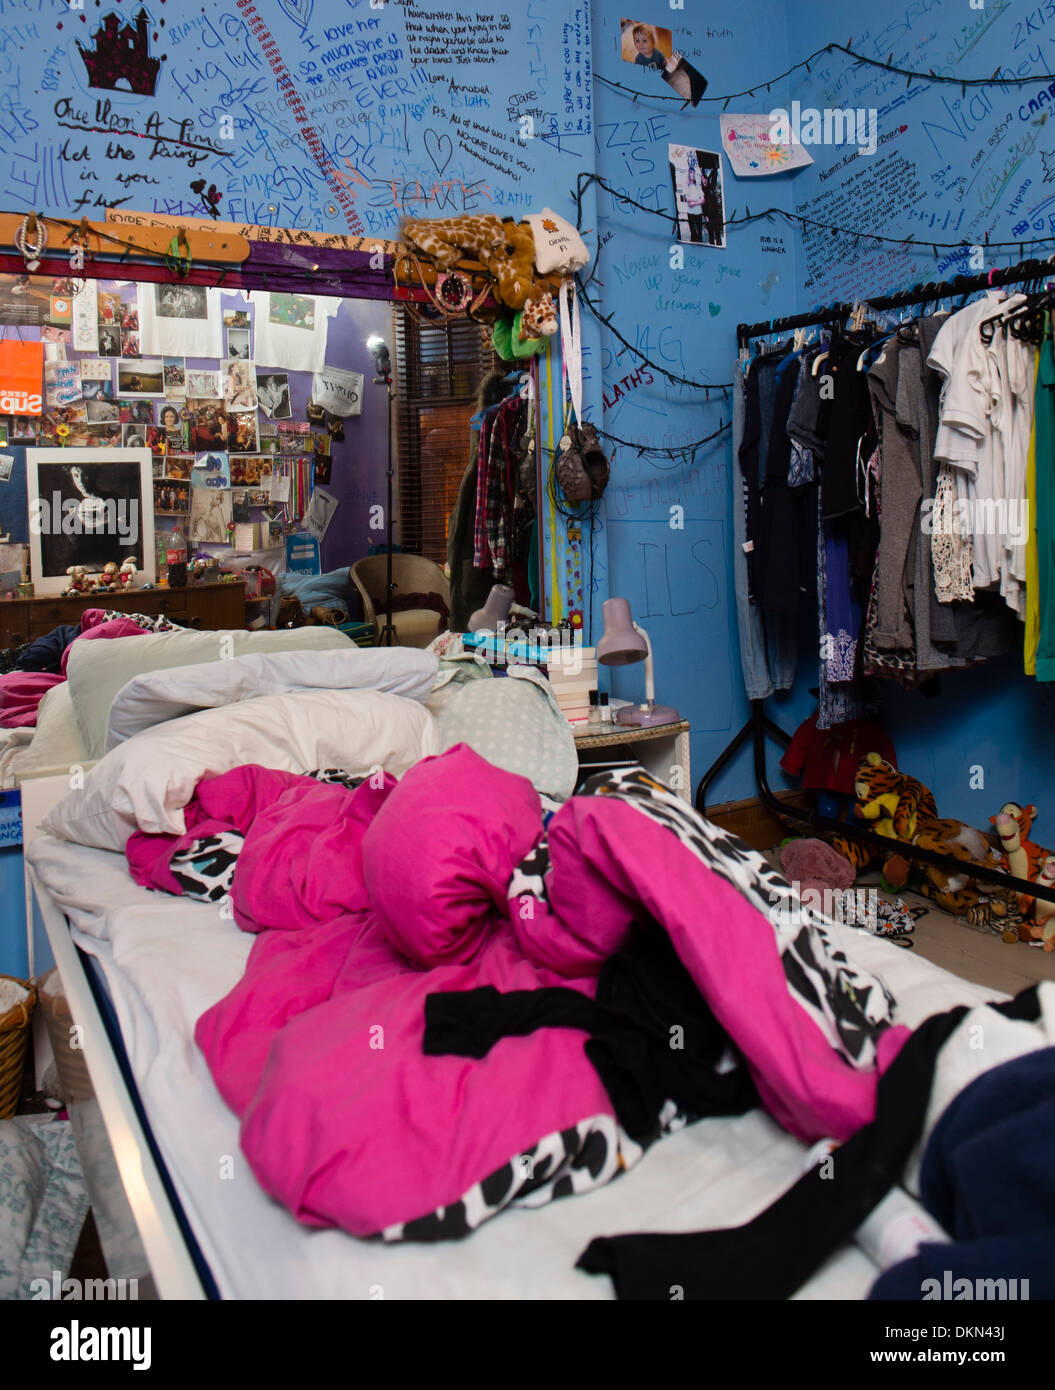 A teenage girl's messy untidy bedroom, with handwriting all over the walls,  UK Stock Photo